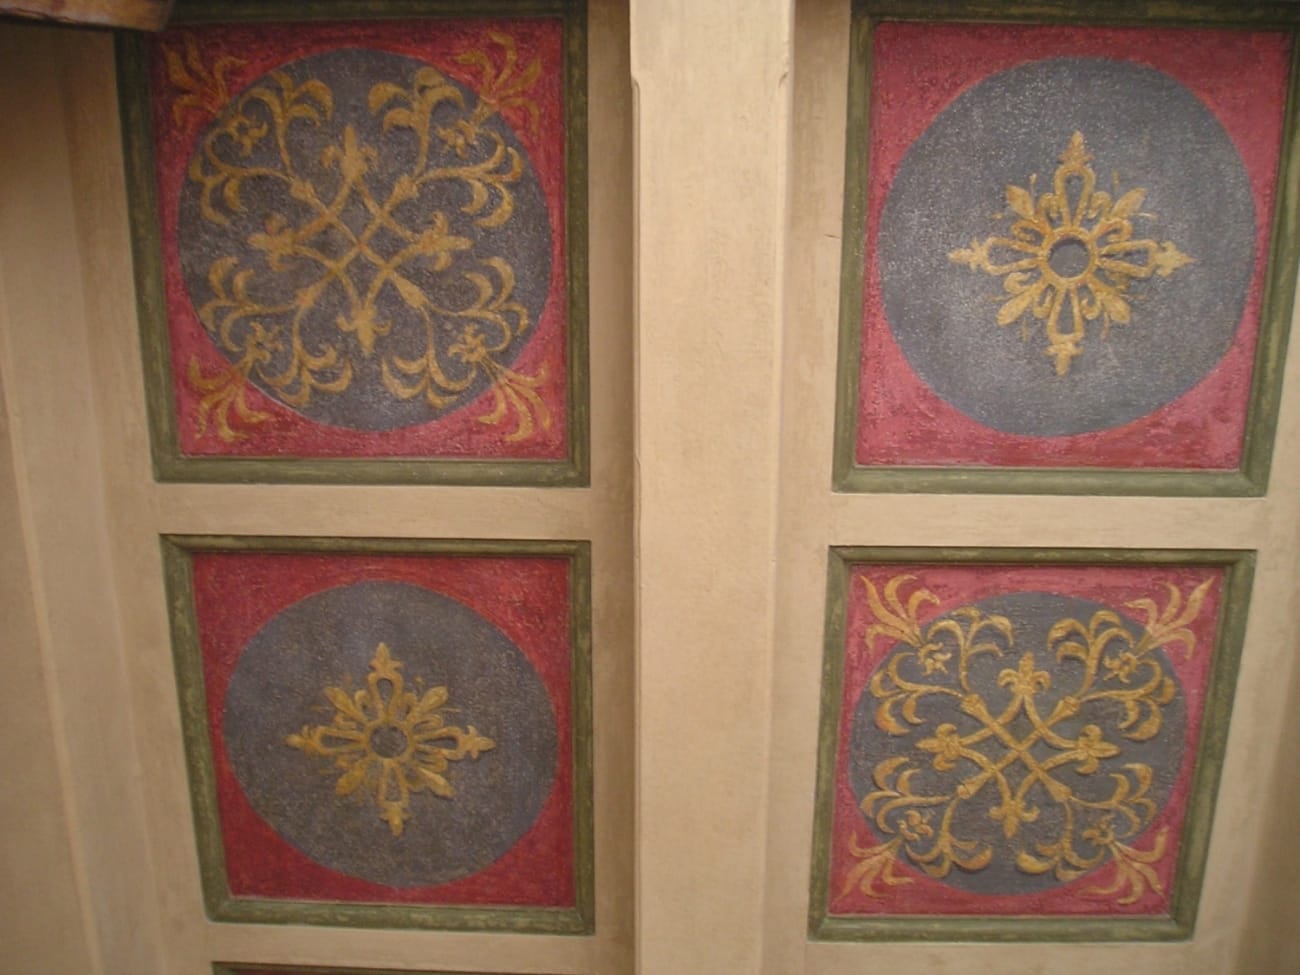 Decorated ceiling Jane Harman storage and furniture restoration in Florence